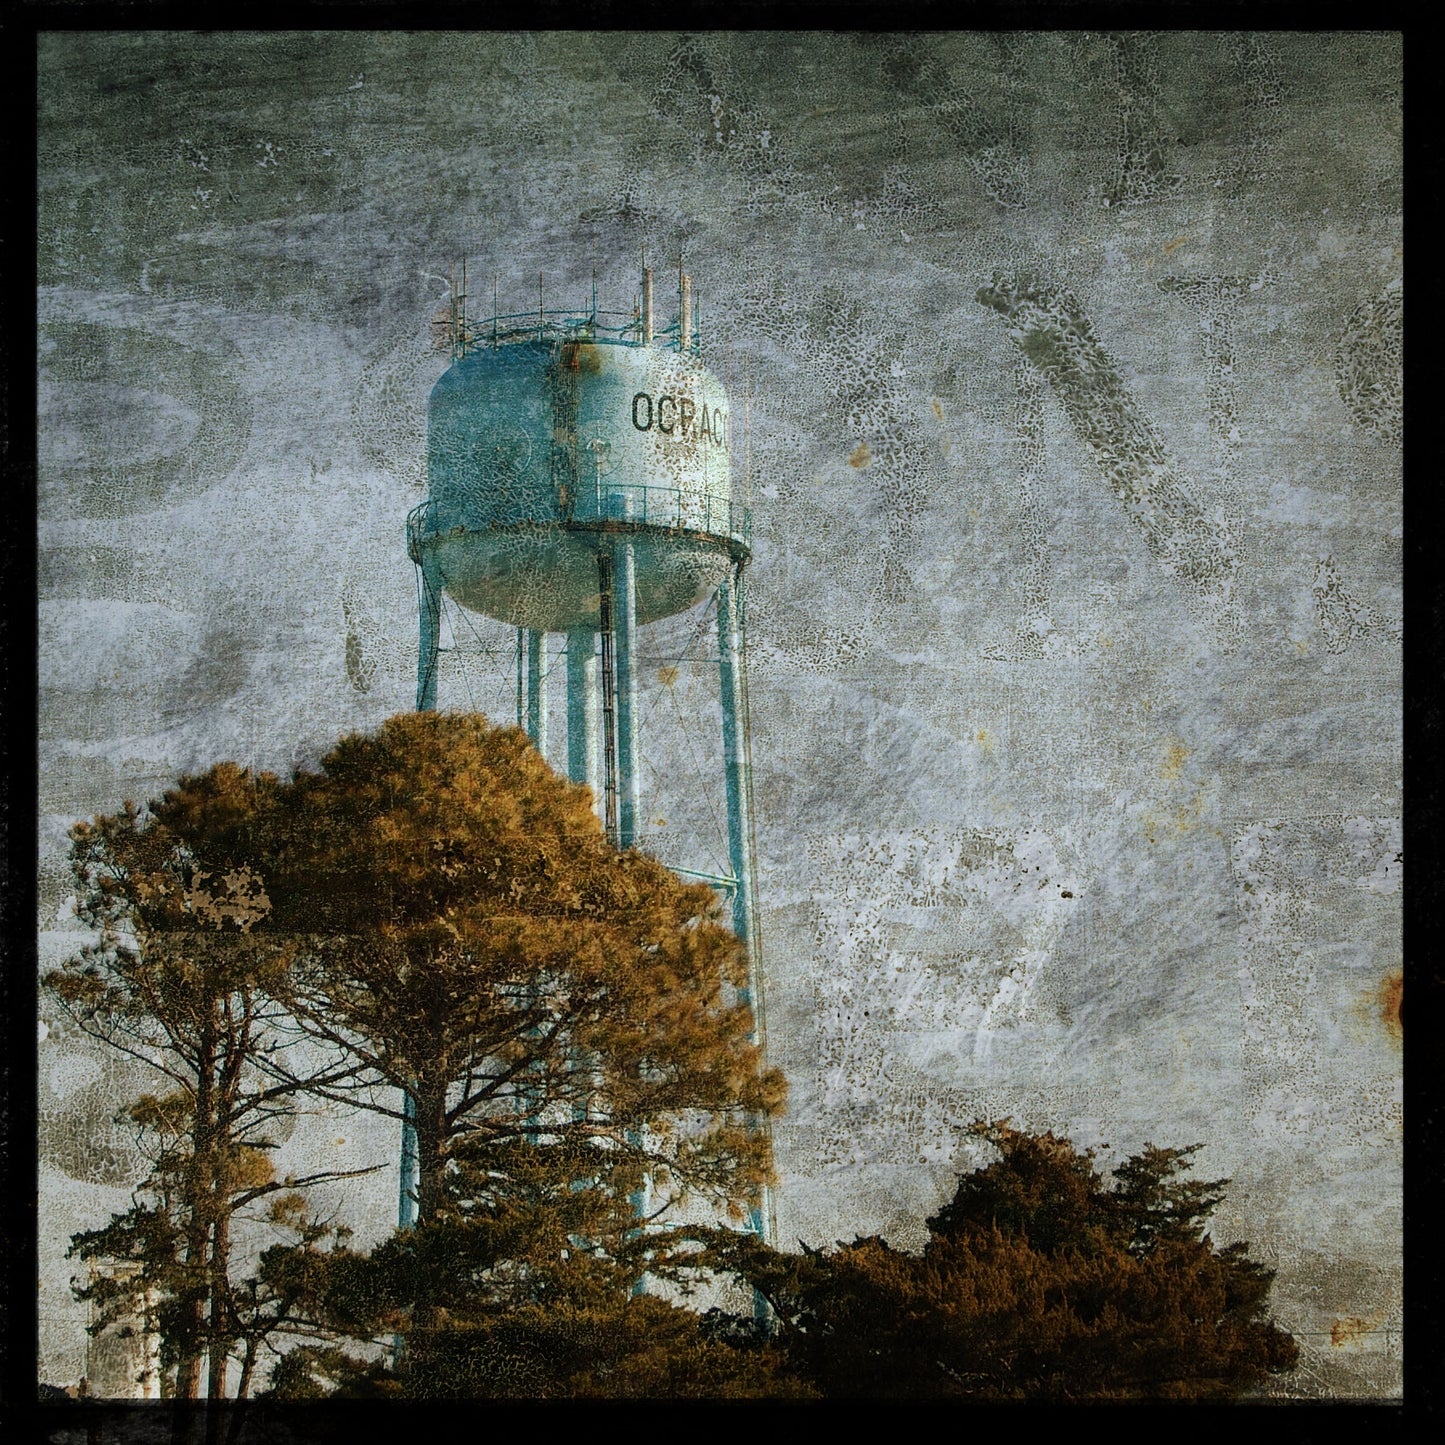 Ocracoke Water Tower Photograph